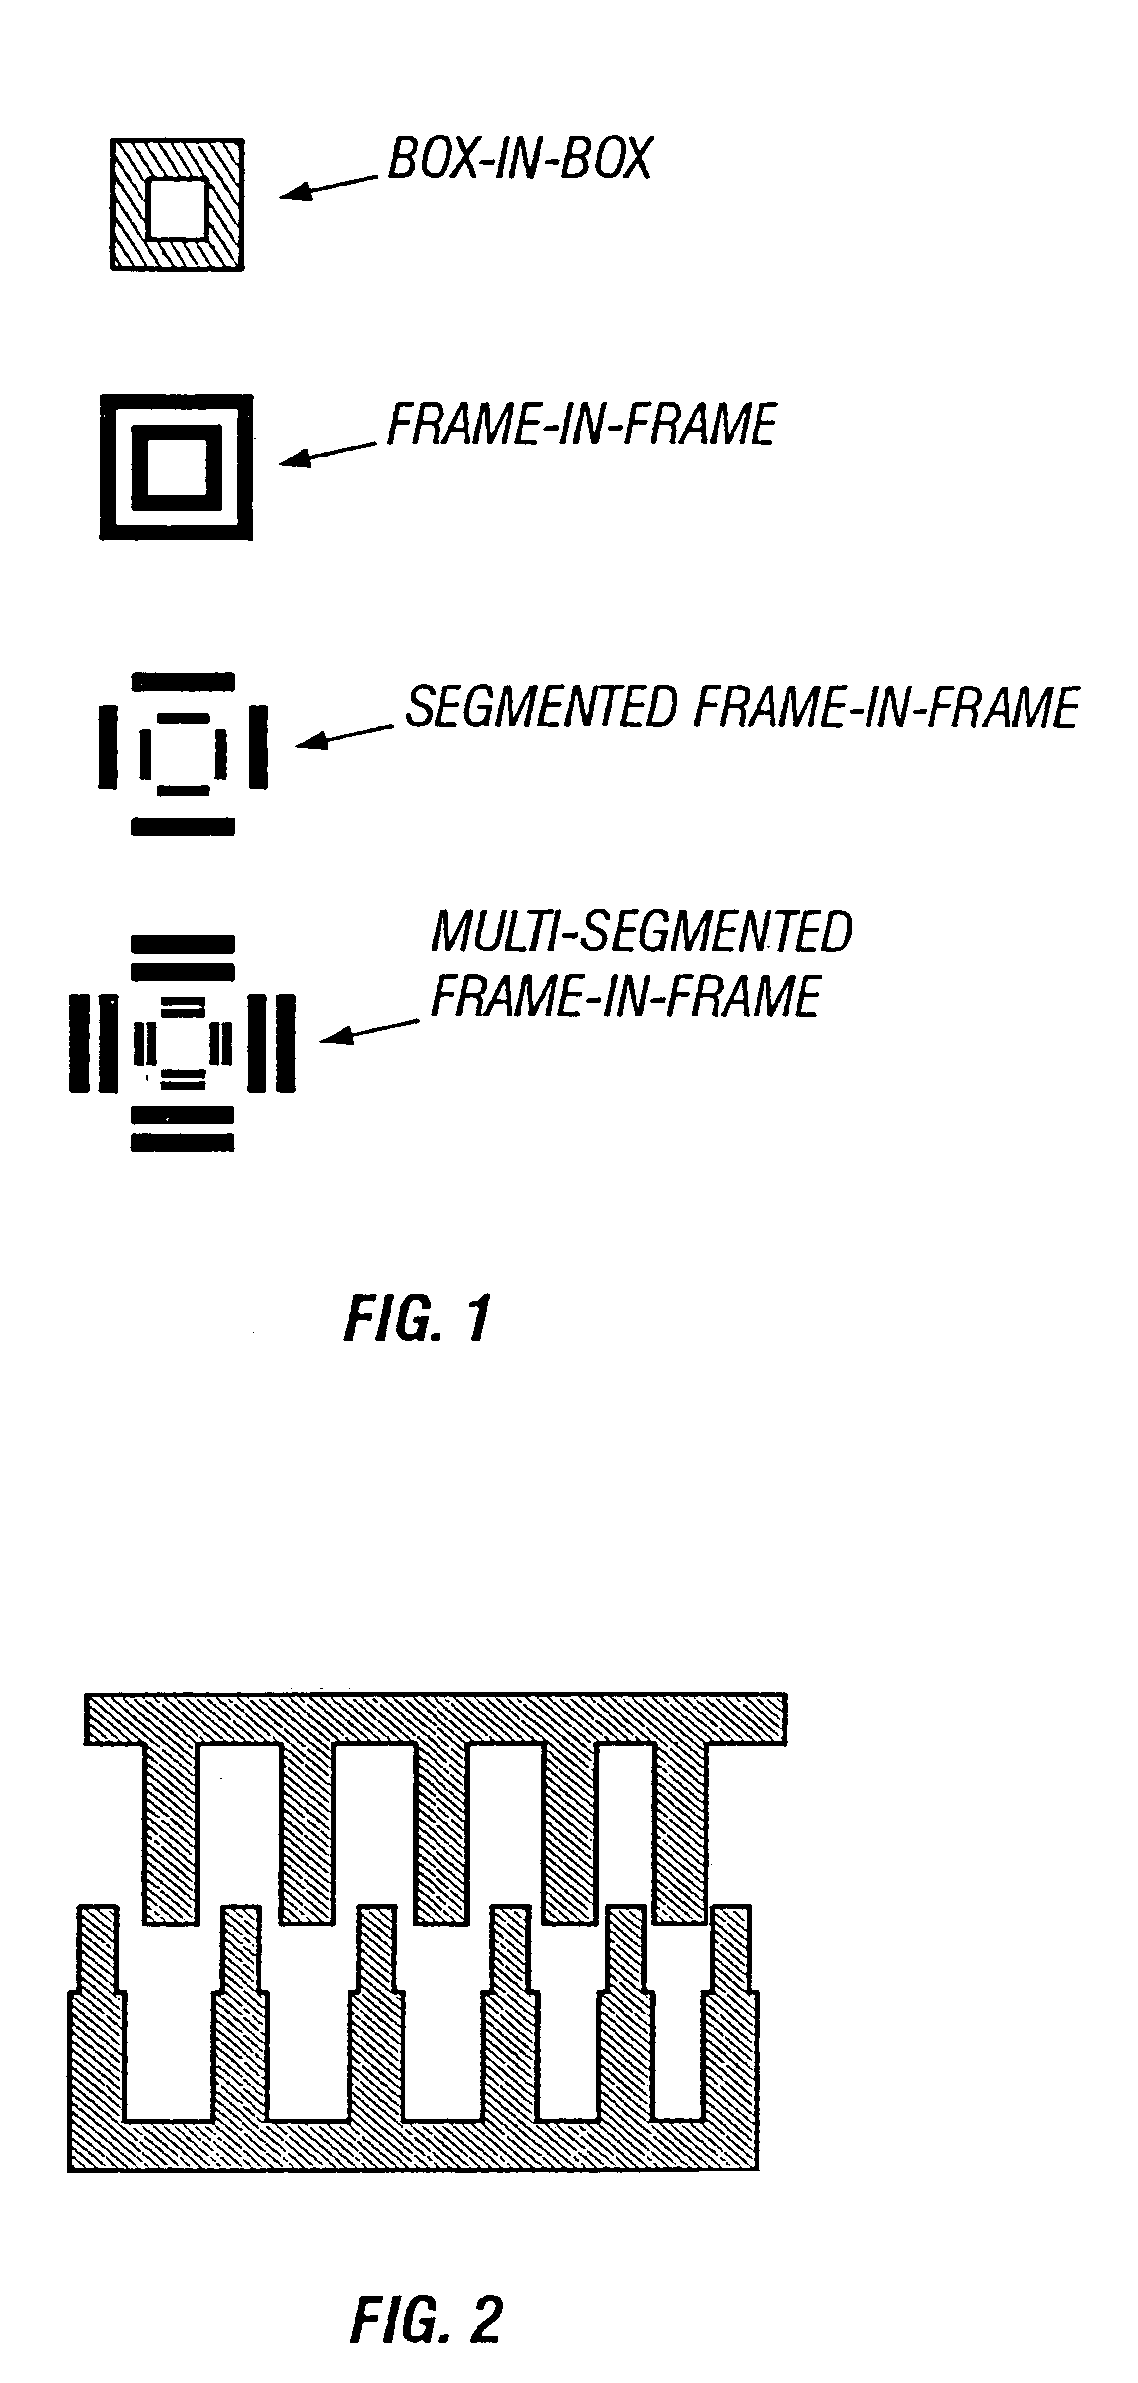 Method and apparatus for self-referenced wafer stage positional error mapping